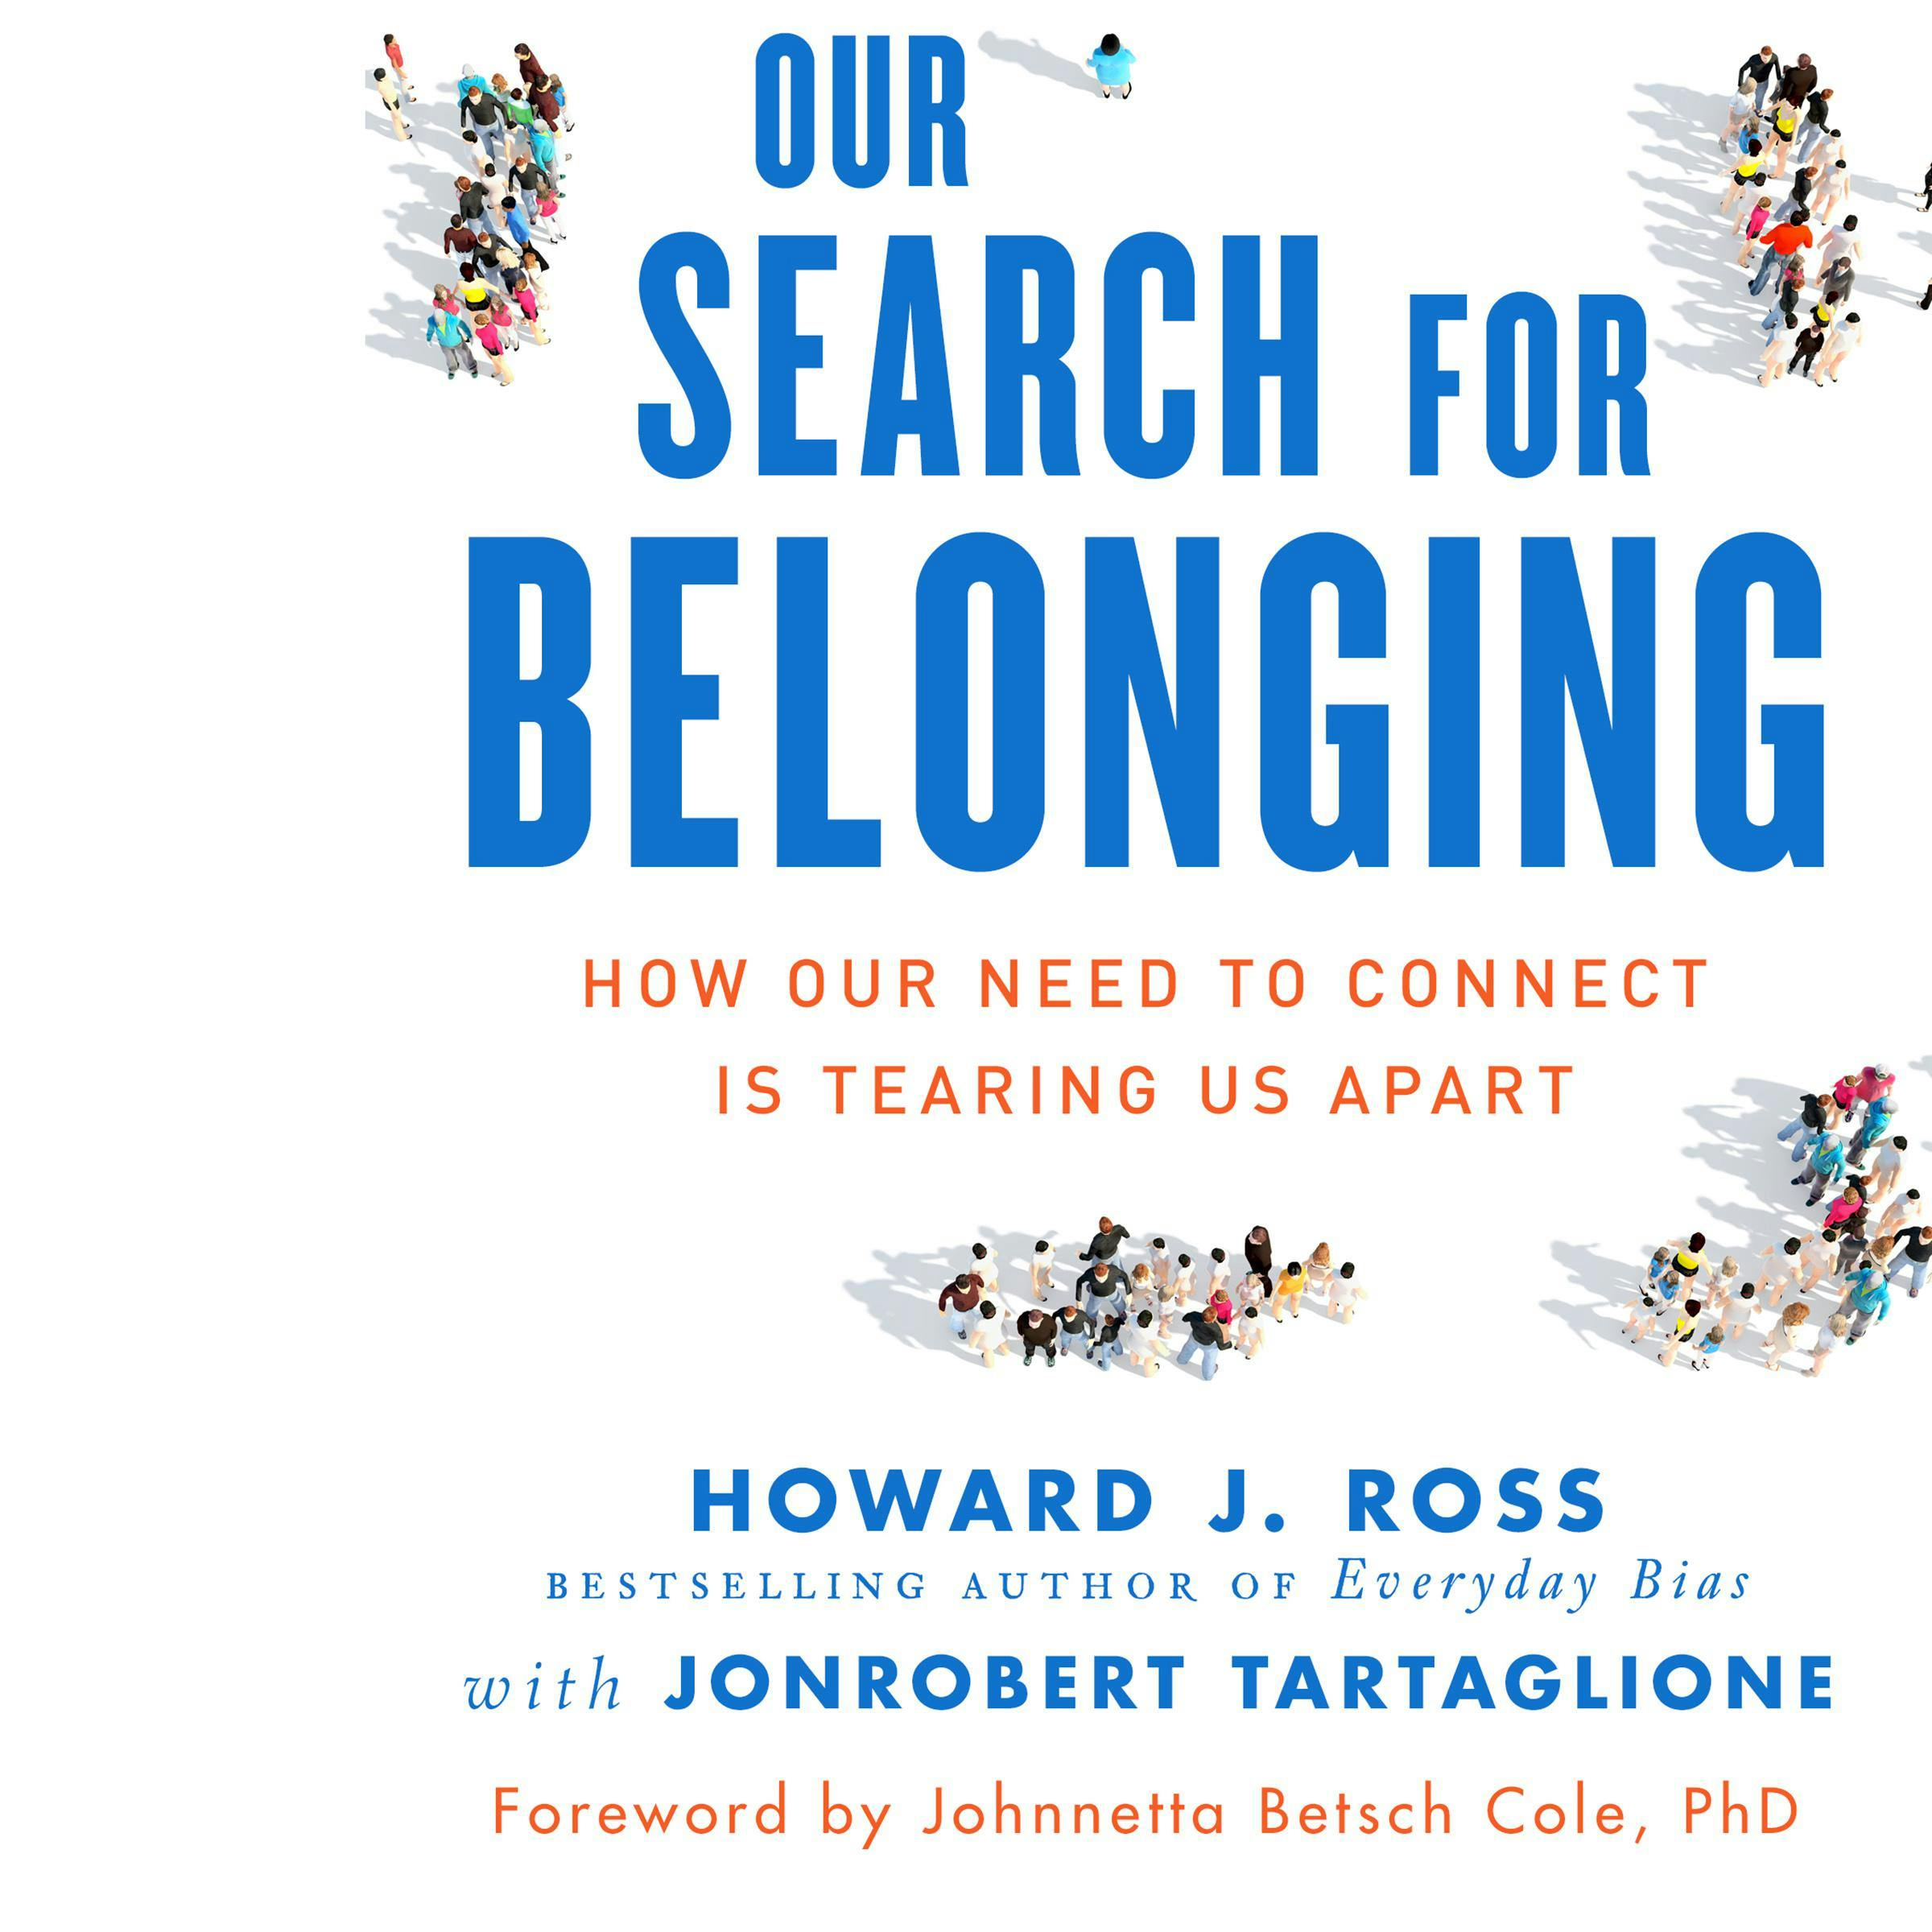 Our Search for Belonging: How Our Need to Connect Is Tearing Us Apart - JonRobert Tartaglione, Howard J. Ross